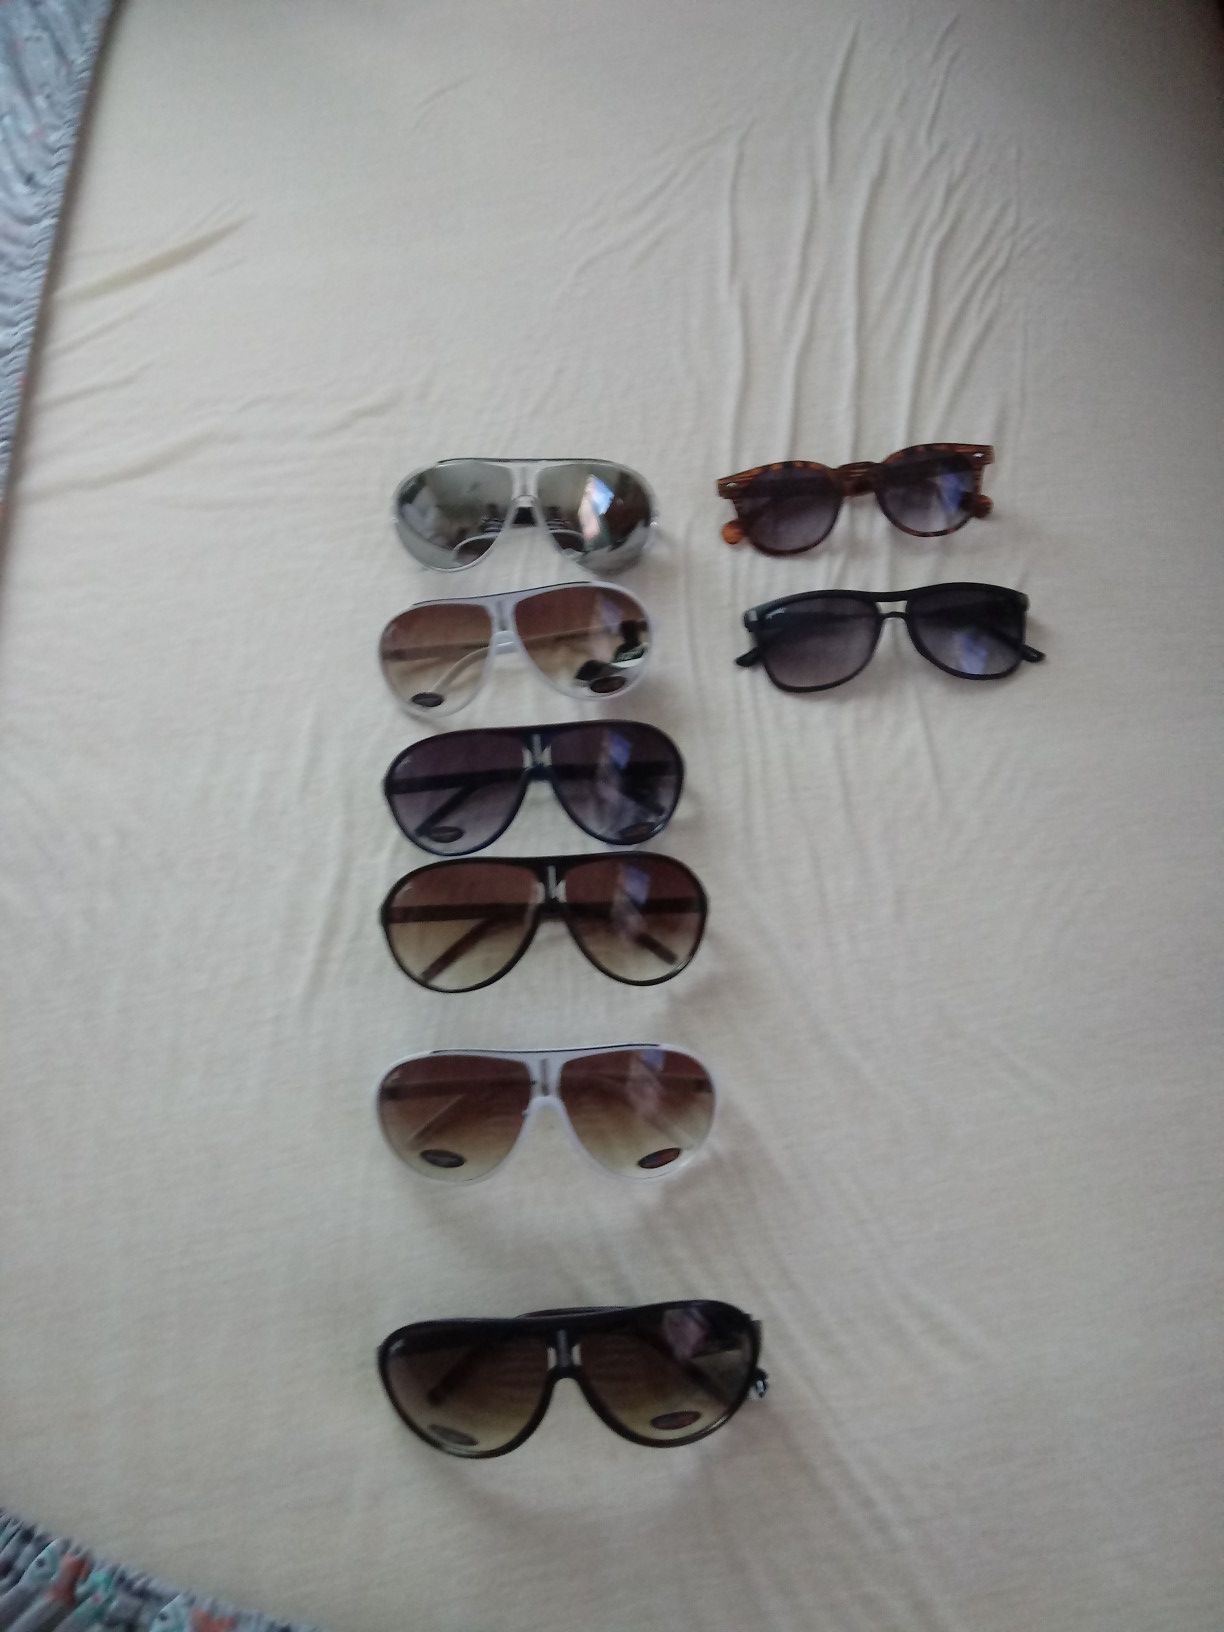 8 pair of Sun glasses brand new they go for 12.99 a piece but selling for less